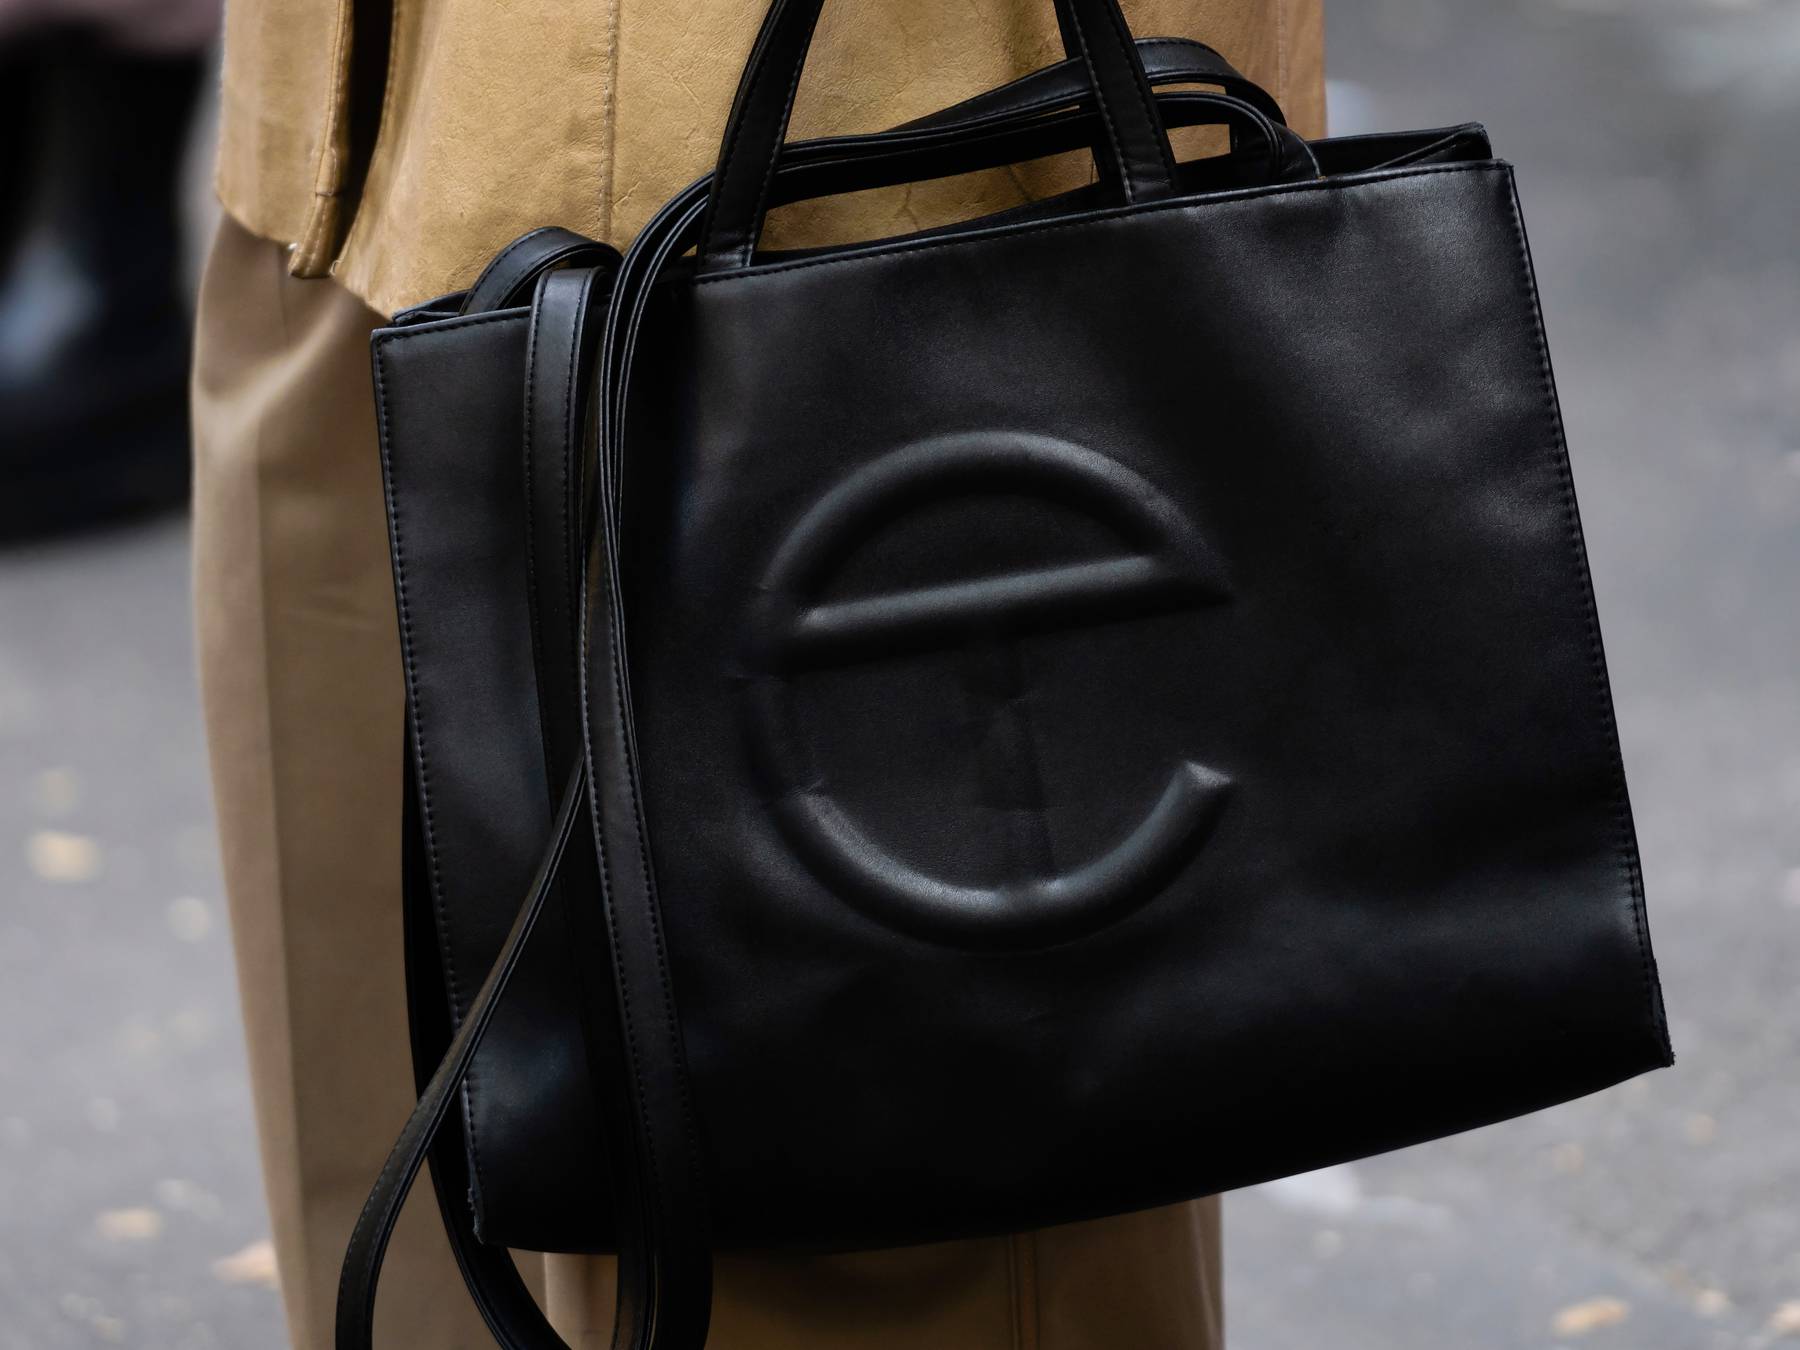 Telfar's new pricing model has some consumers confused